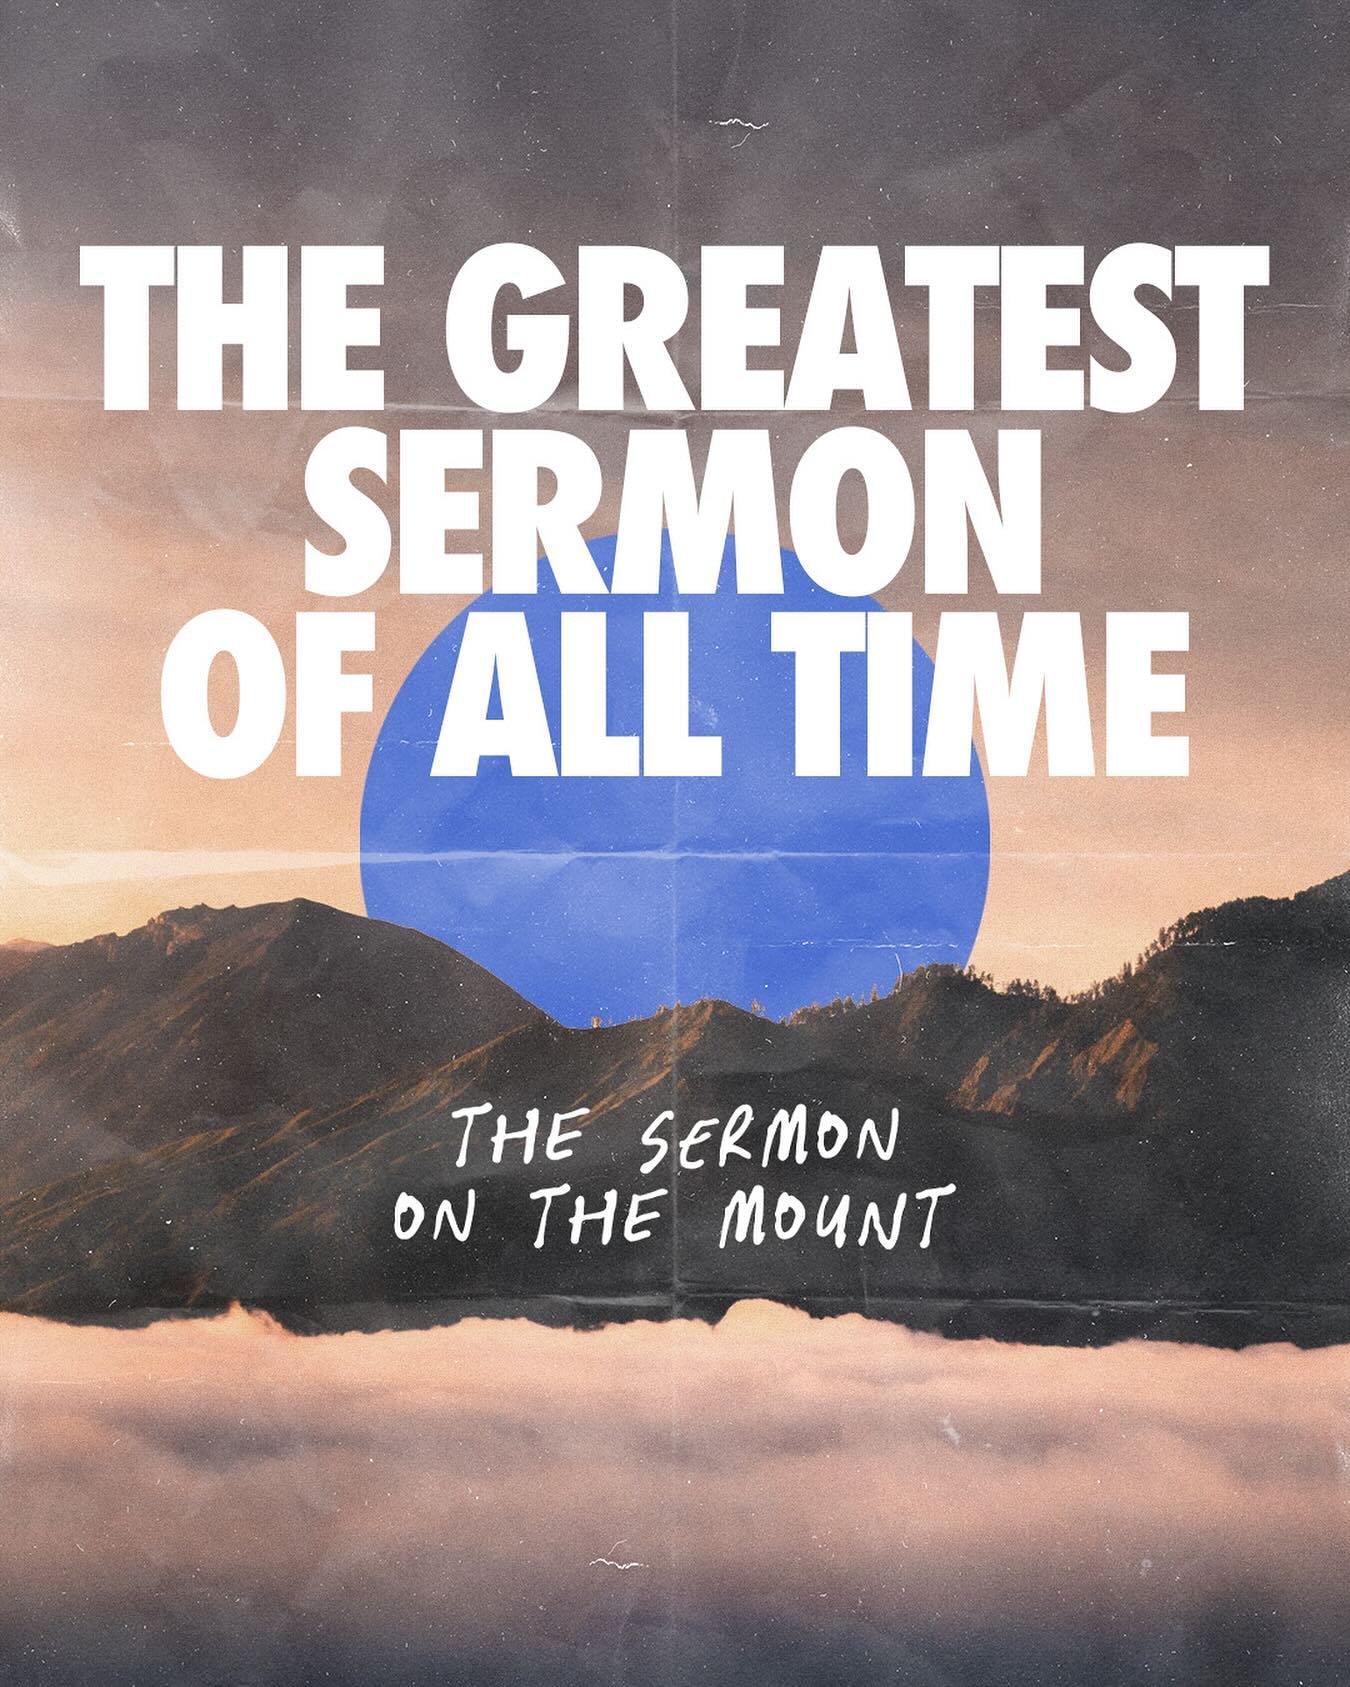 This Sunday marks the start of our 10-week exploration into the Sermon on the Mount from the pulpit! Join us weekly as we delve into Jesus&rsquo; most famous sermon on living as kingdom-minded disciples.